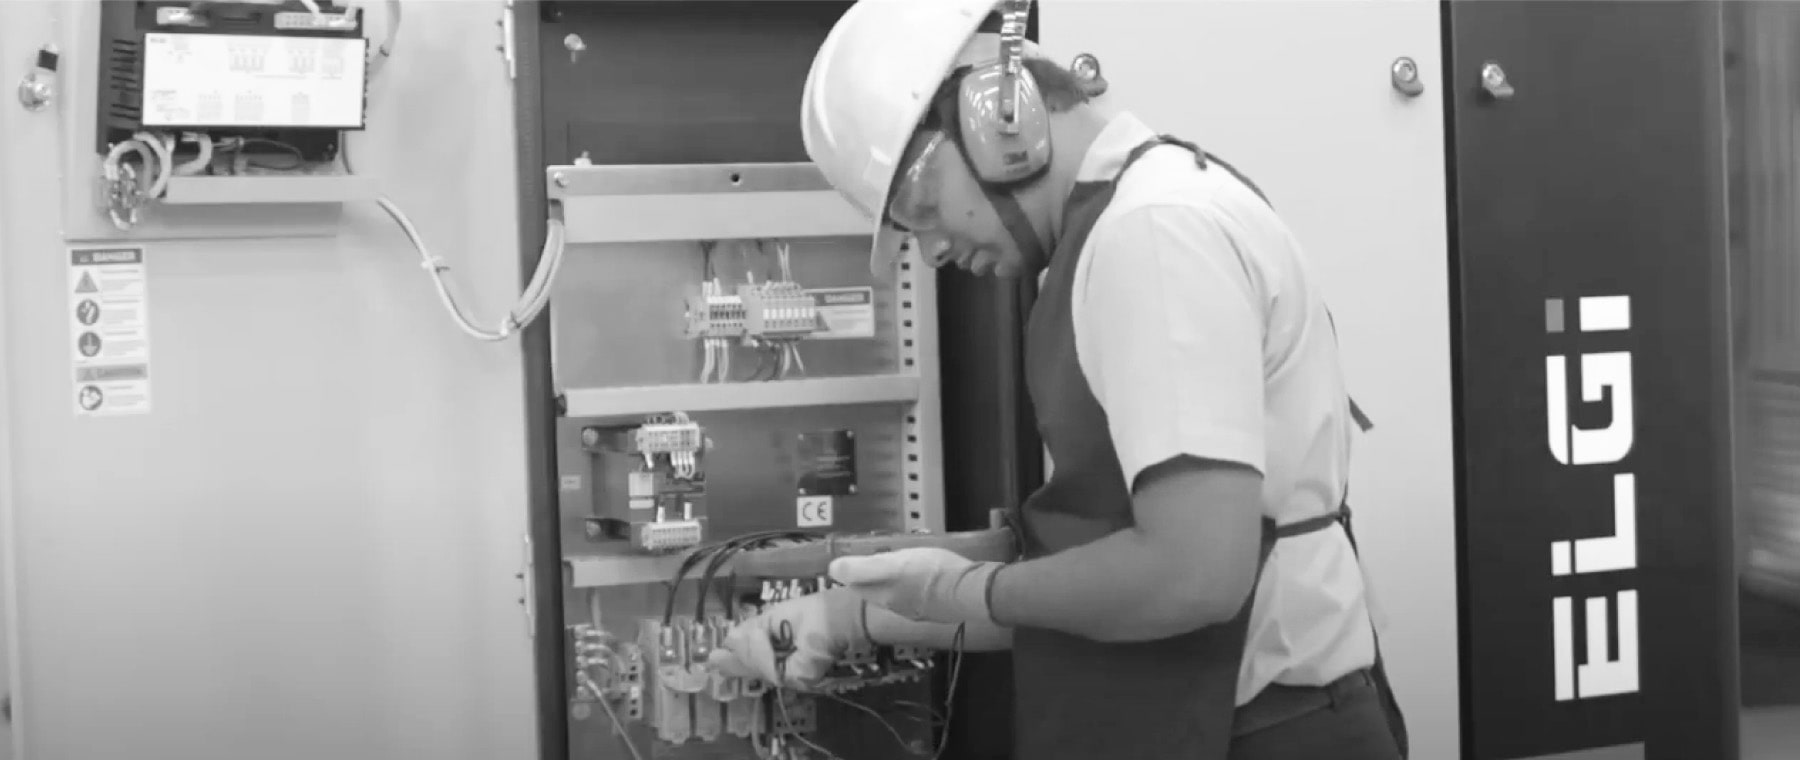 Smart solutions for troubleshooting your compressed air system